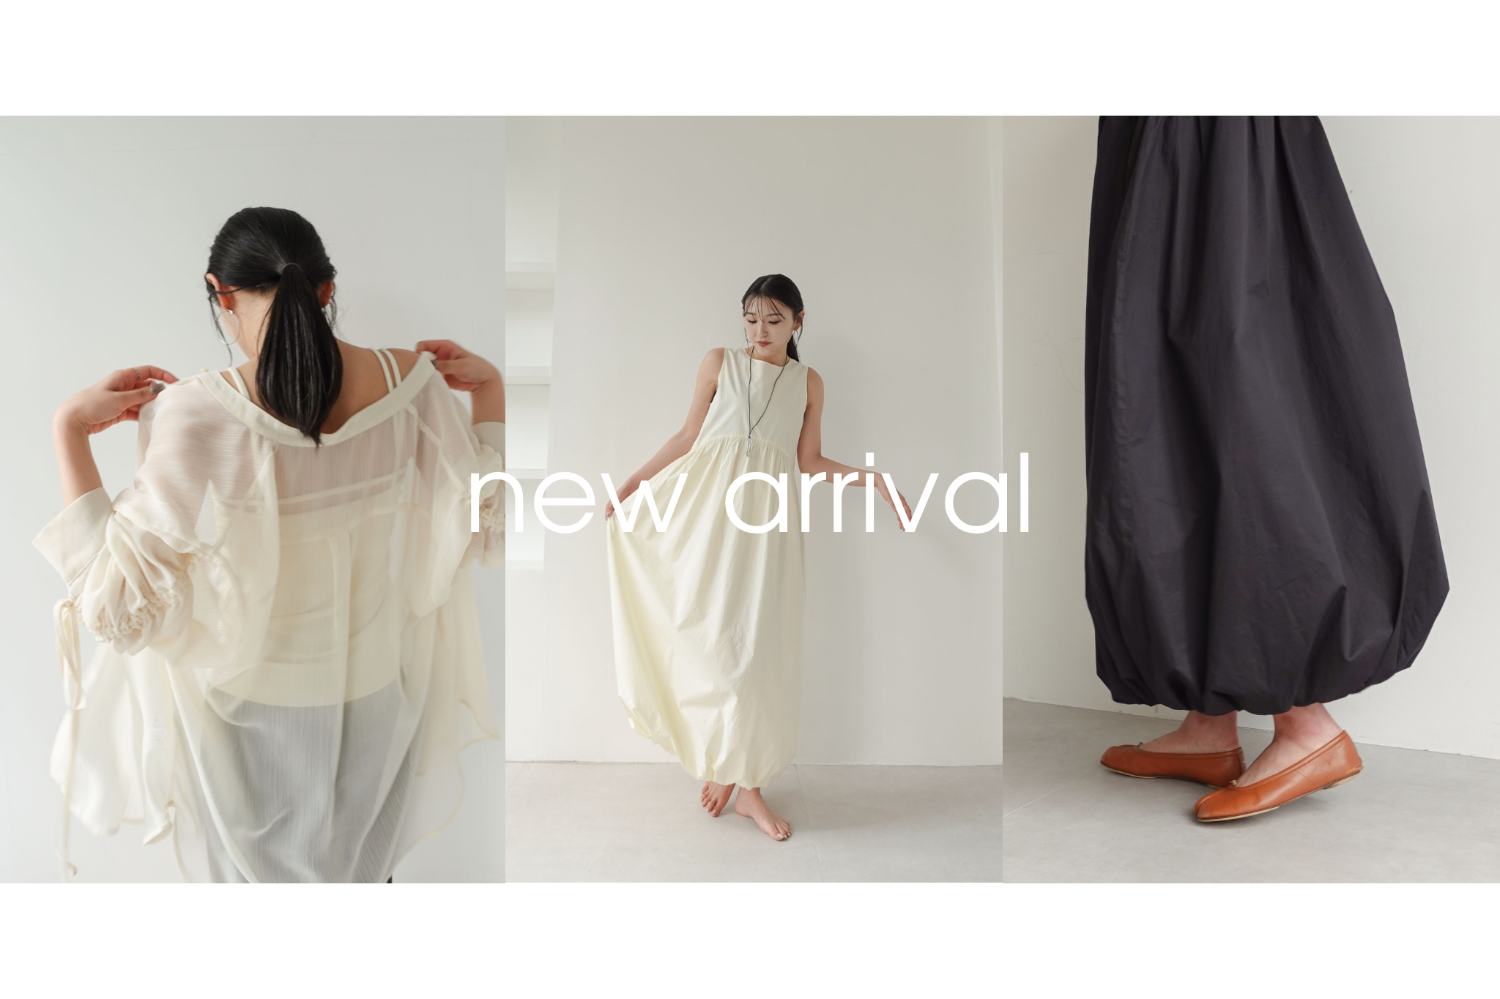 3/29 21:00- new arrival.